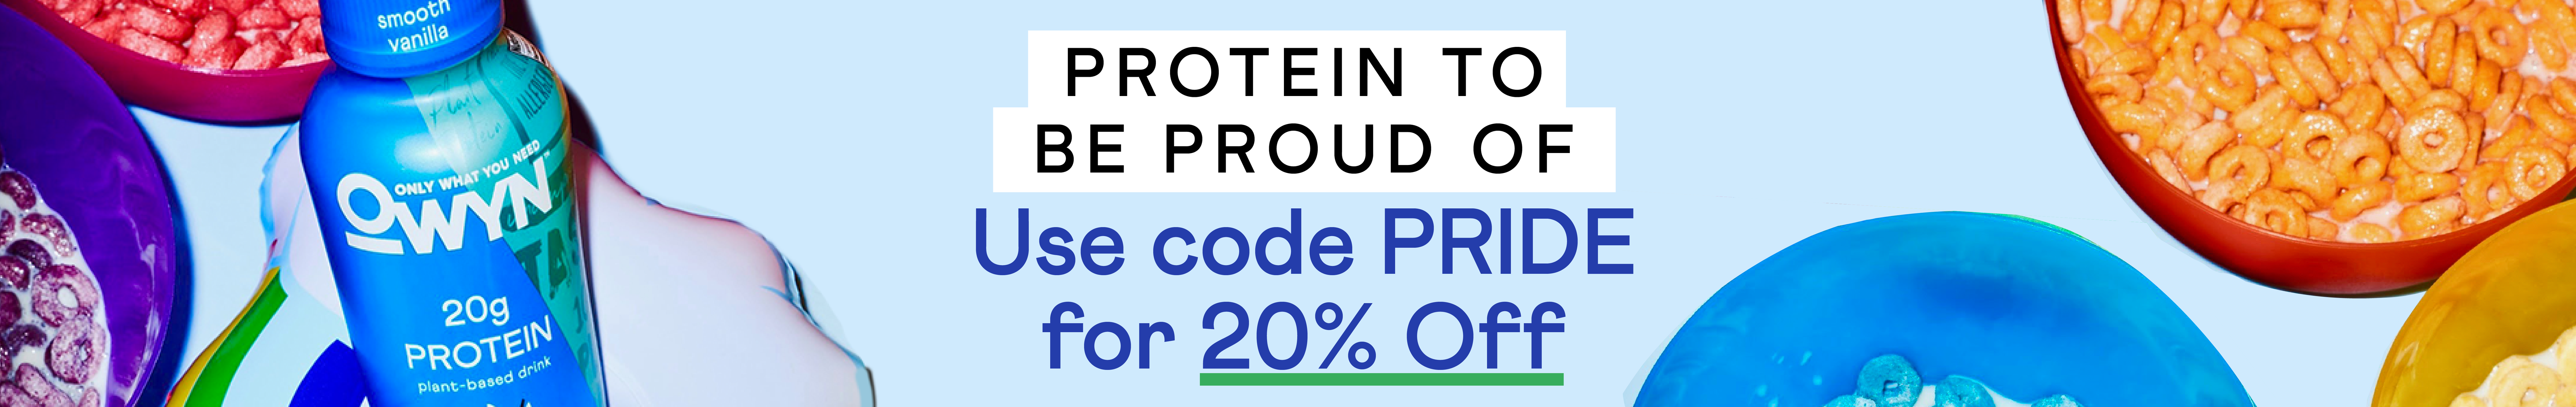 Protein to be Proud of - 20% Off